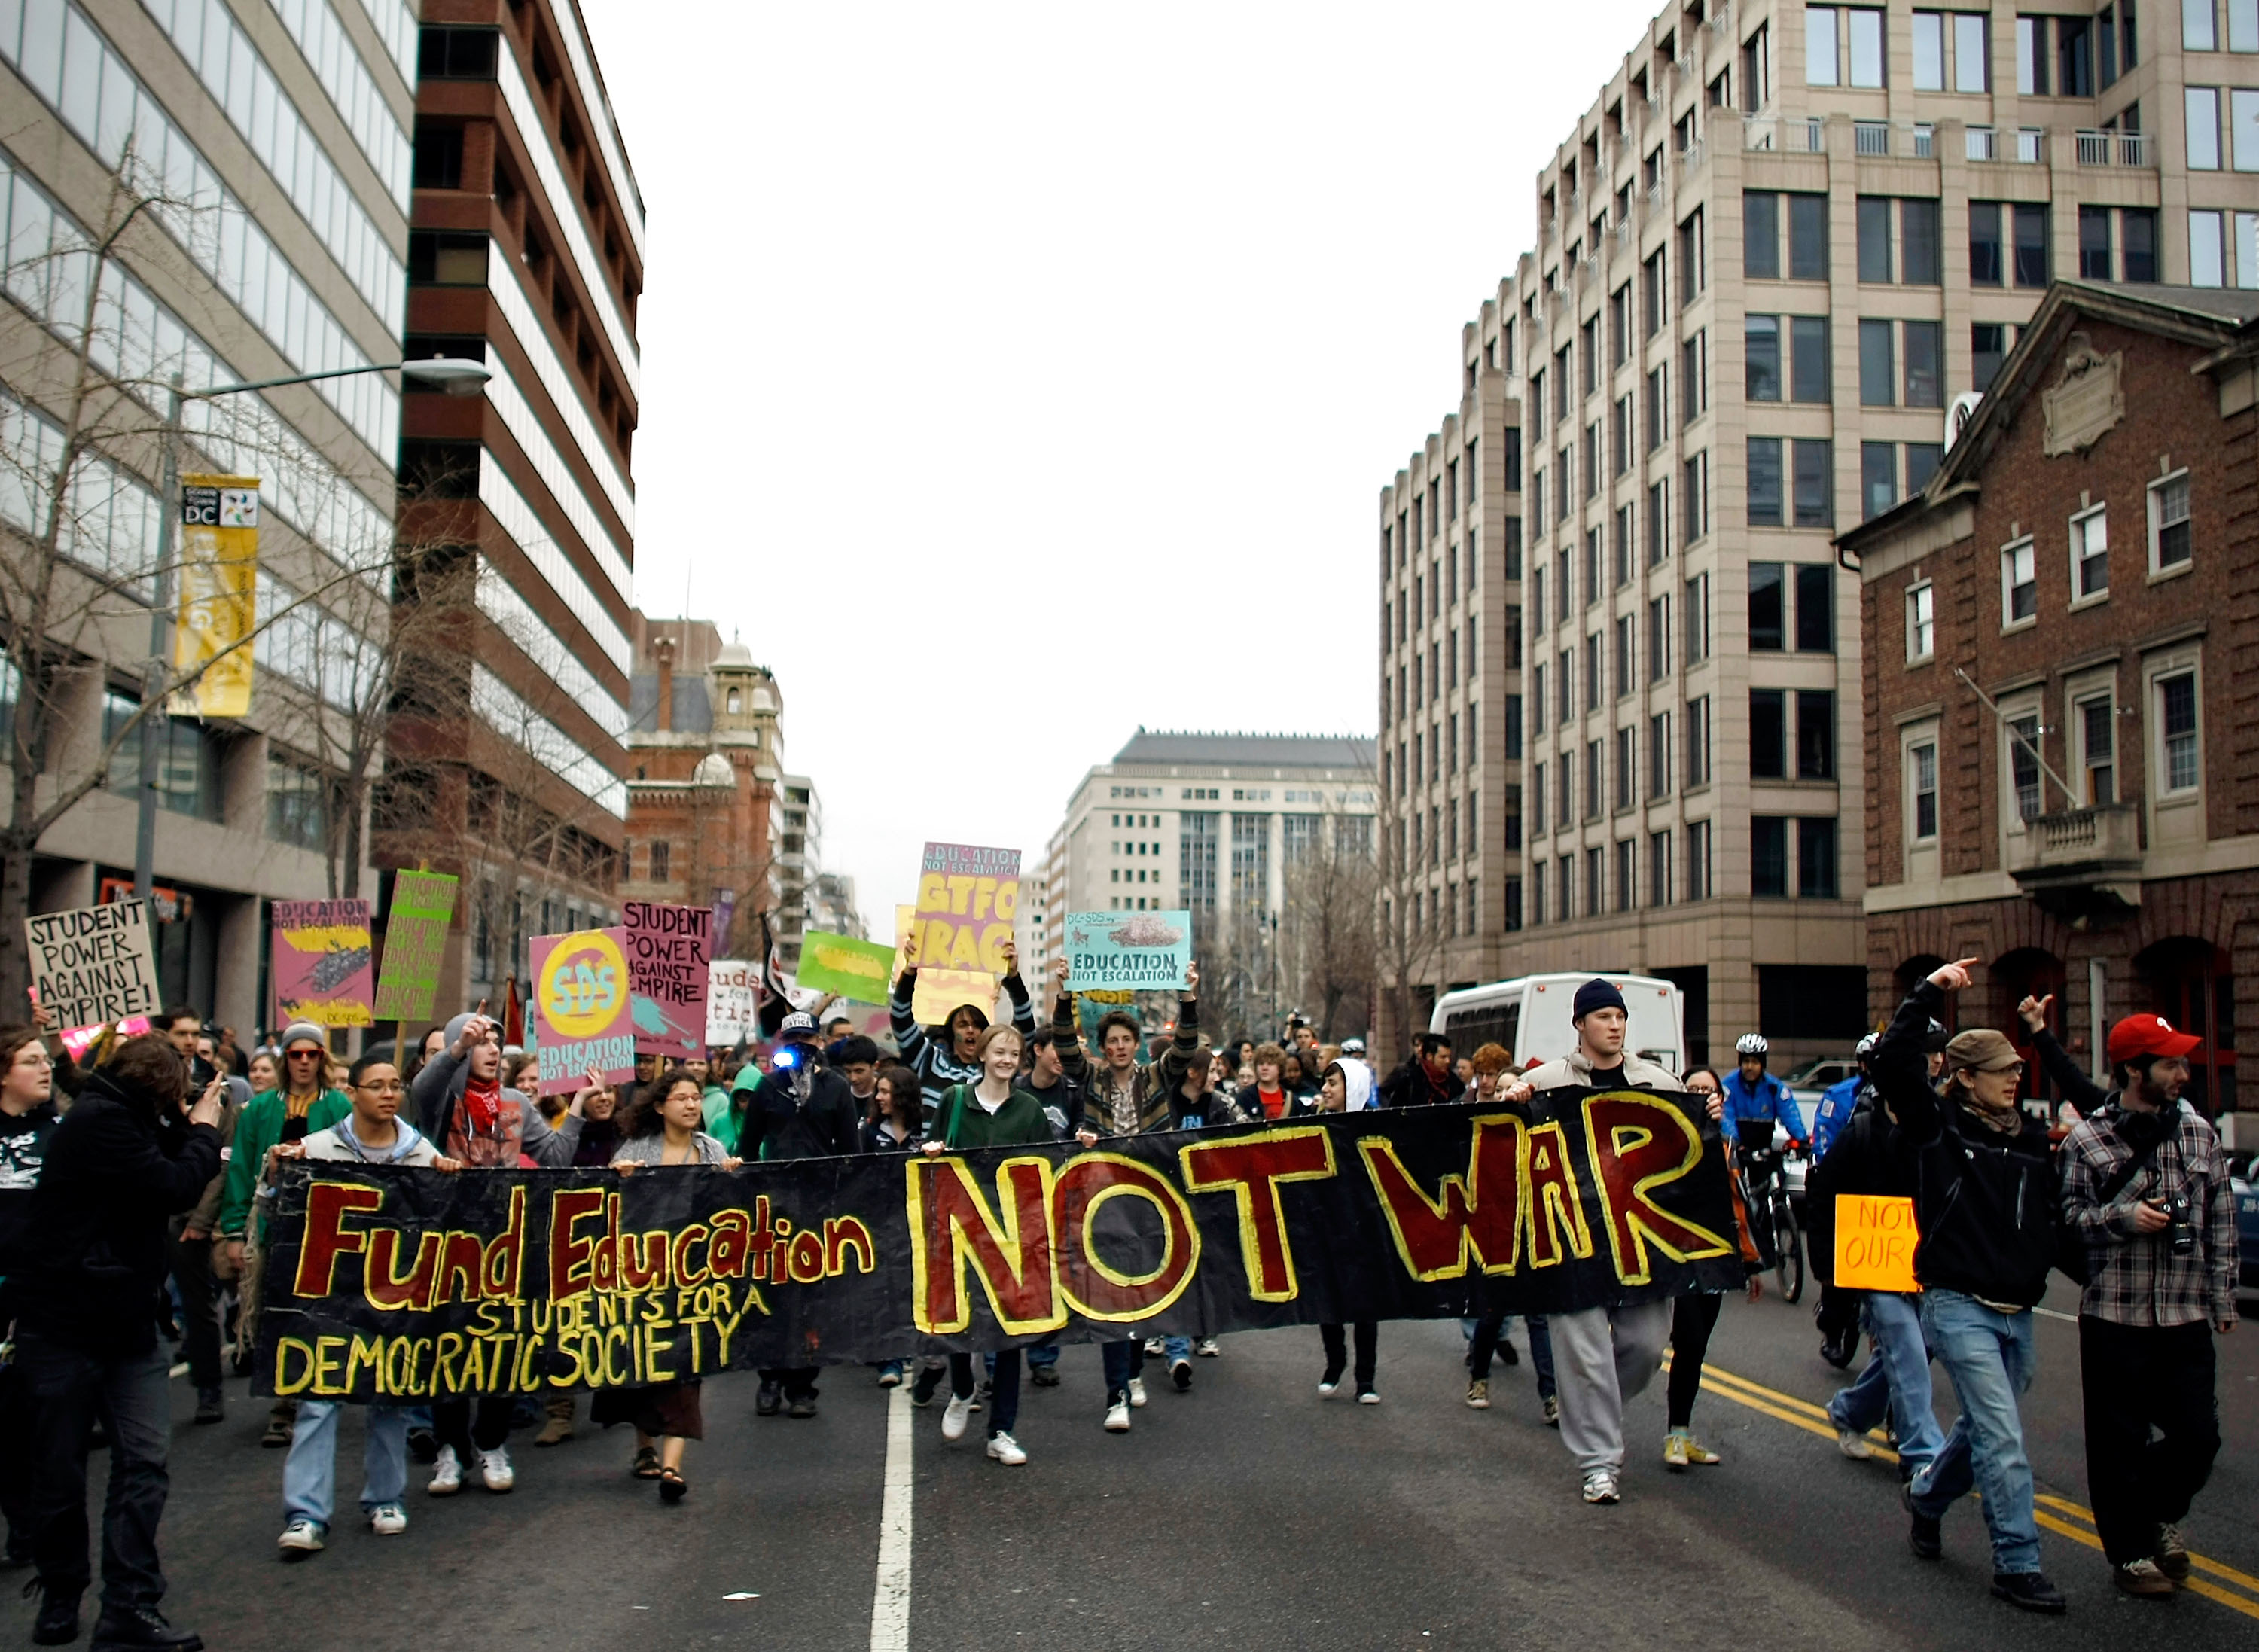 Chip Somodevilla/Getty Images. Washington DC.Demonstrators from Students for a Democratic Society march down the center of 14th Street March 19, 2009 in downtown Washington, DC. About 80 students danced, blocked streets and demonstrated to mark the sixth anniversary of the beginning of the Iraq war. More than 200 police officers kept the demonstrators out of the street with cars, trucks, bicycles, motorcycles and horses.